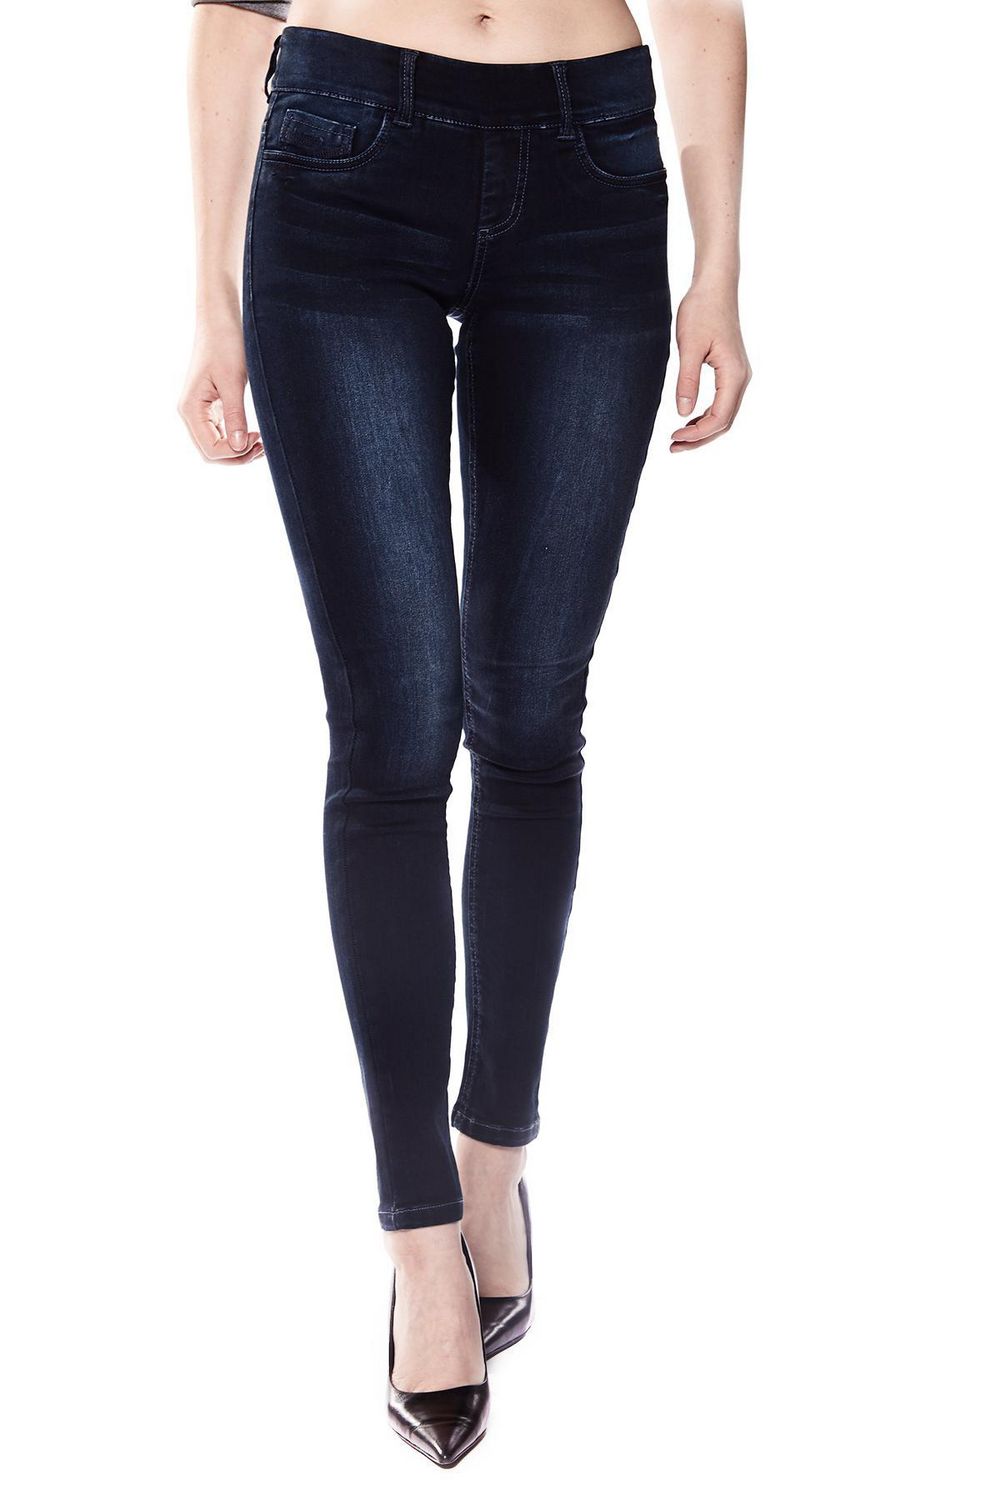 Buy Women Jeans and Jeggings Online